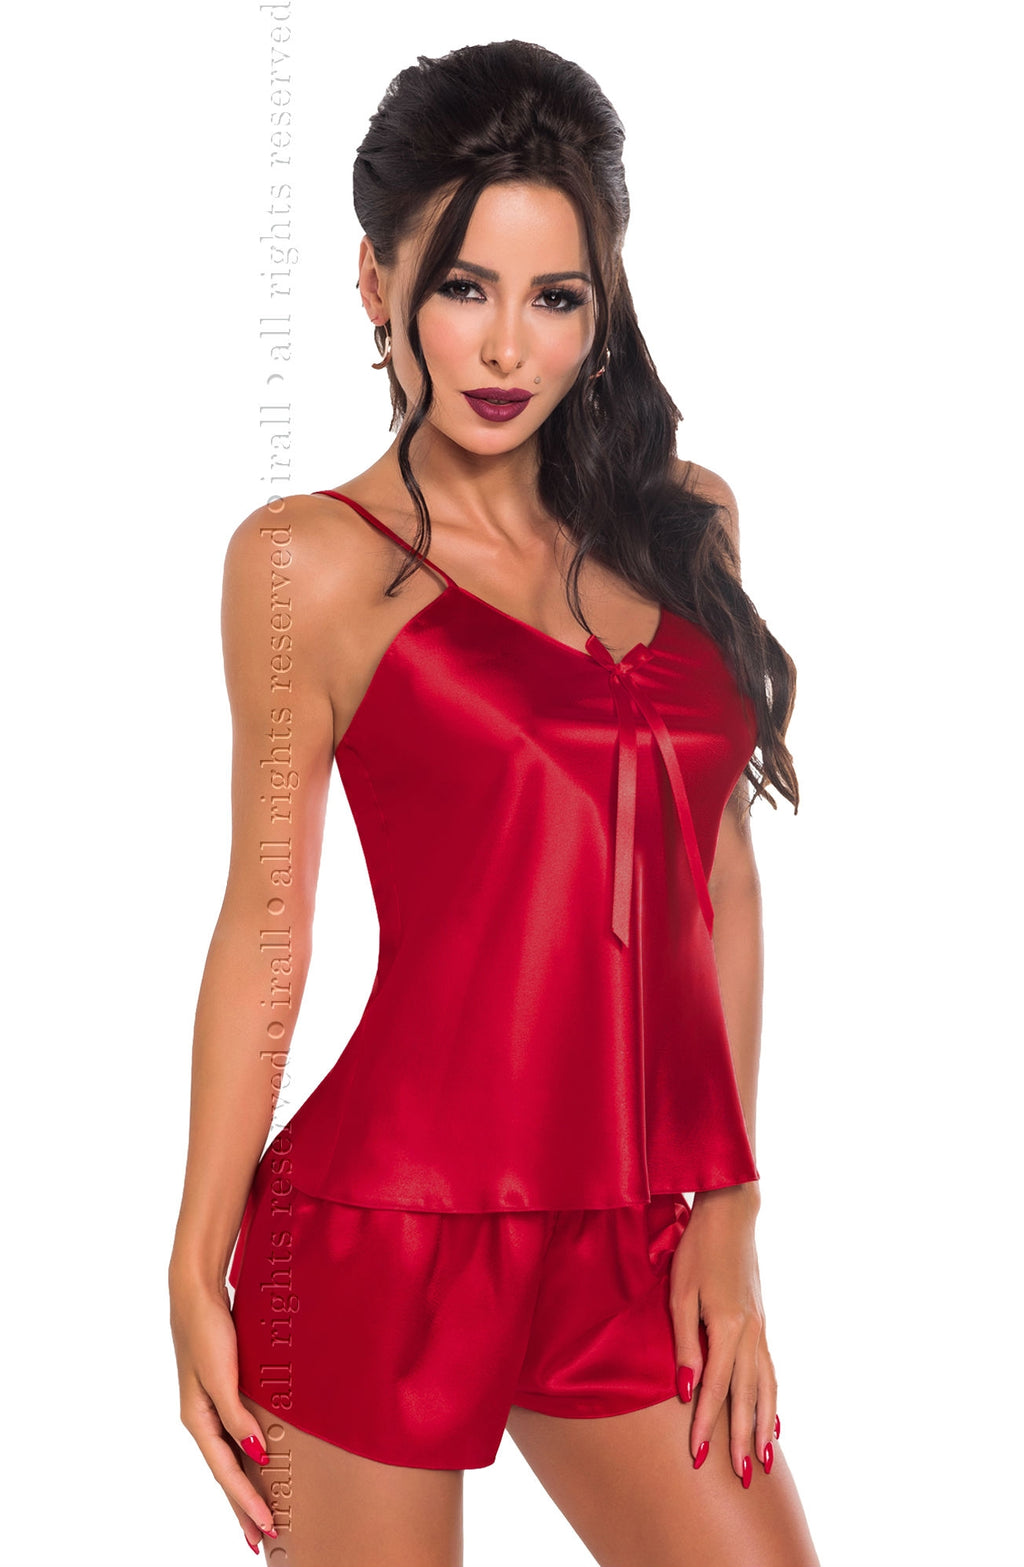 Irall Aria Set  Brands, Irall, NEWLY-IMPORTED, Nightwear, Our TOP Valentine's Gifts!, Pyjamas, Short Sets, Valentine, Valentines - So Luxe Lingerie